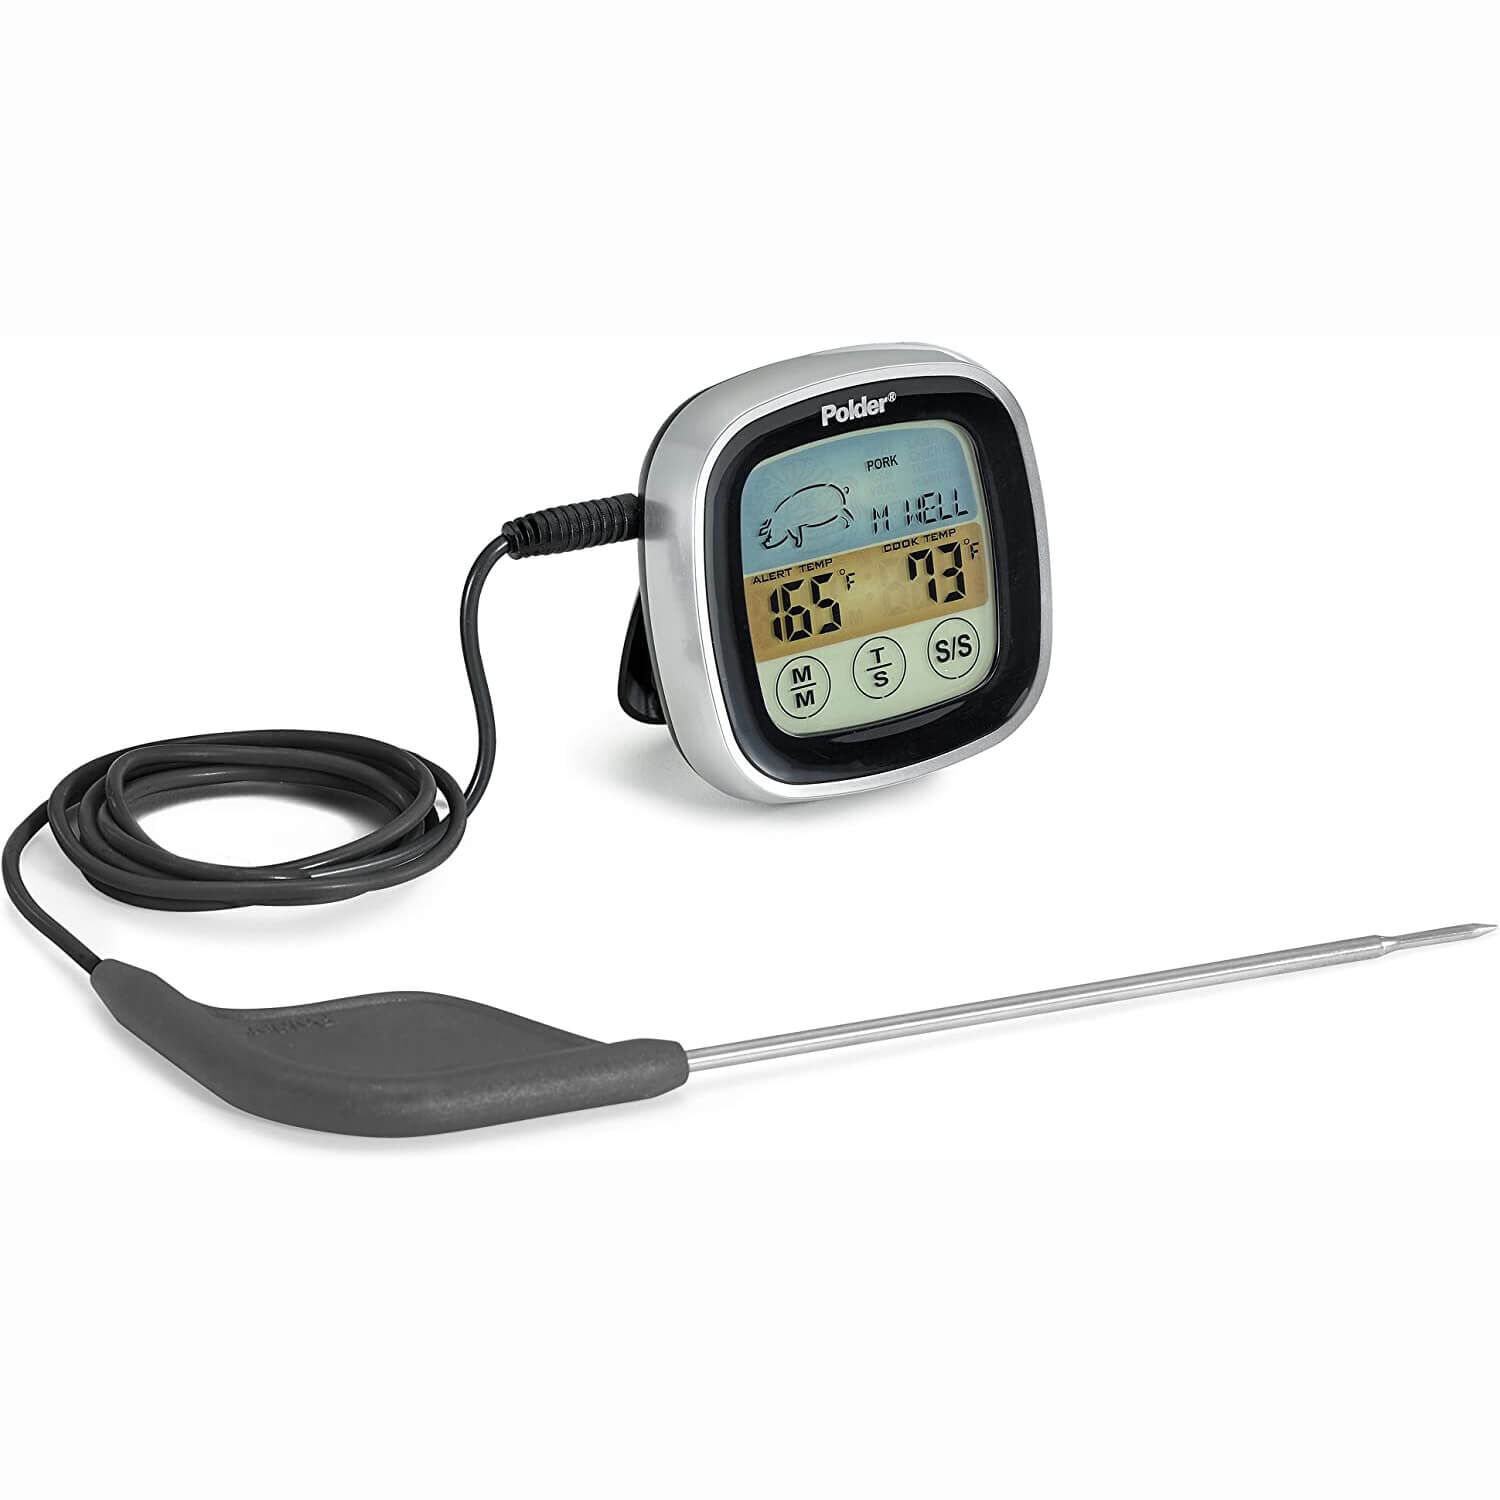 https://www.homestoreandmore.co.uk/dw/image/v2/BCBN_PRD/on/demandware.static/-/Sites-master/default/dw1ae54d50/images/Polder-Deluxe-In-Oven-Digital-Meat-Thermometer-timers-thermometers-073909-hi-res-0.jpg?sw=1500